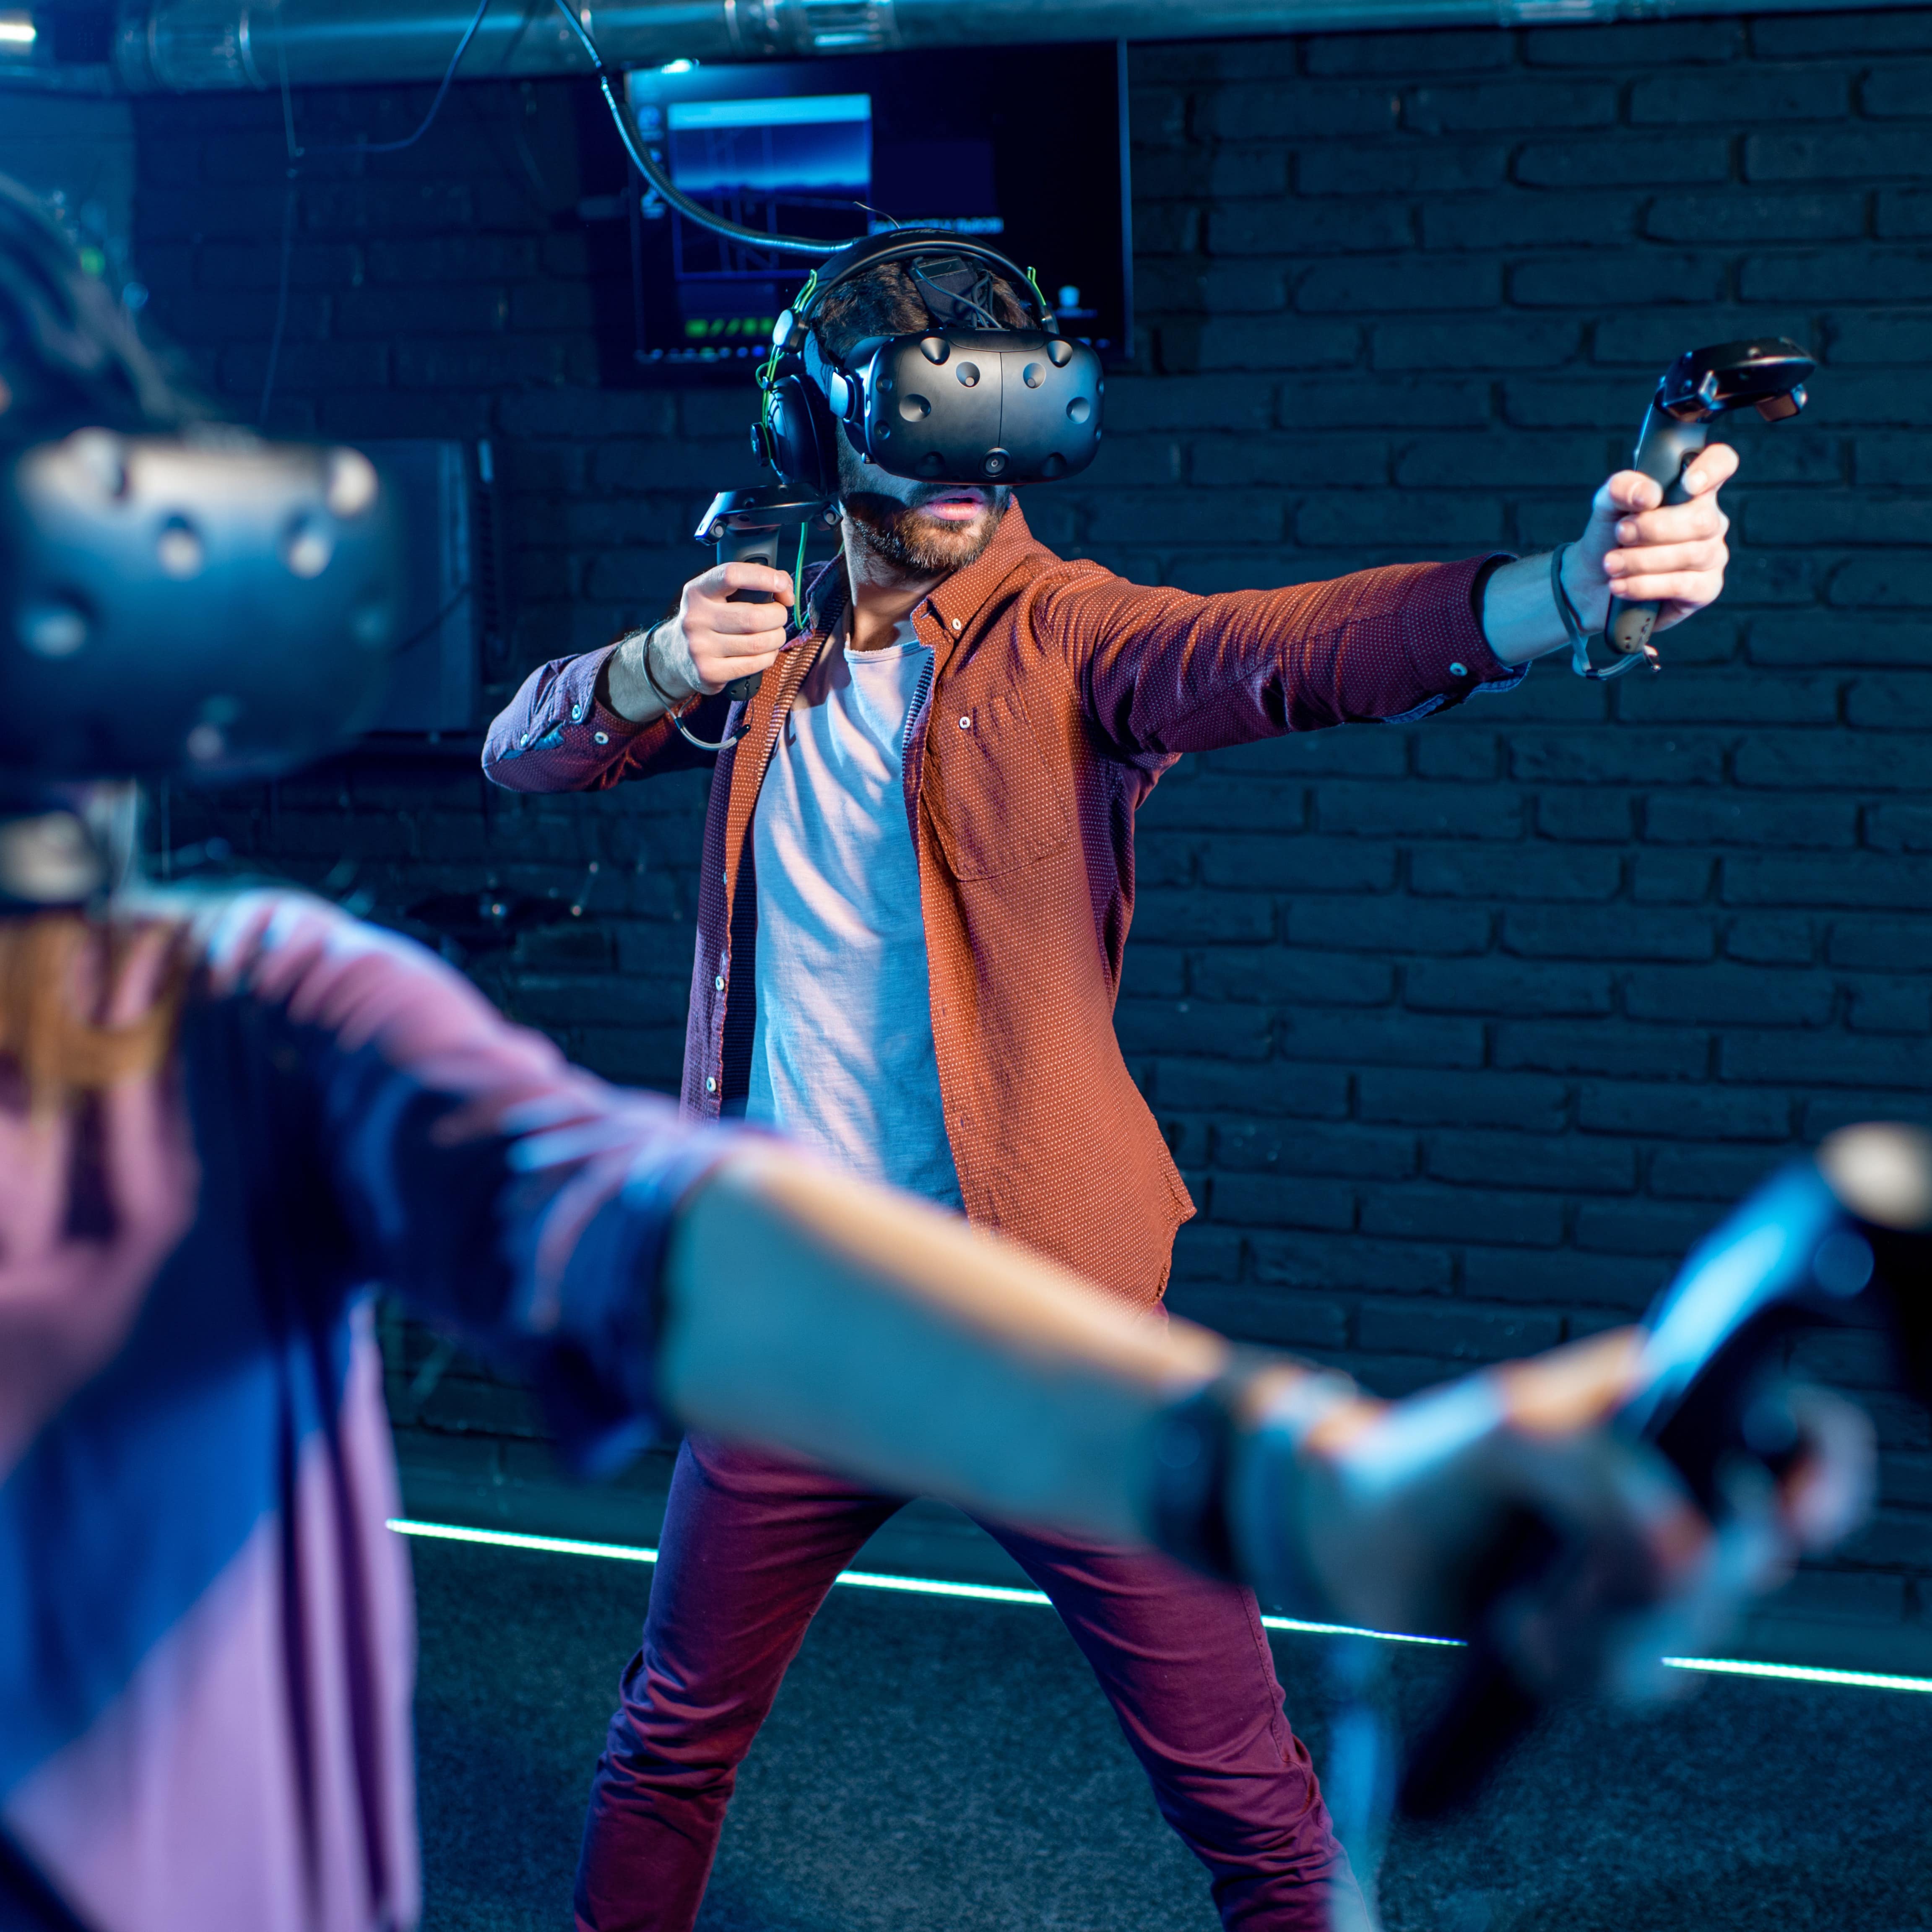 Man and woman playing game using virtual reality headset and gamepads